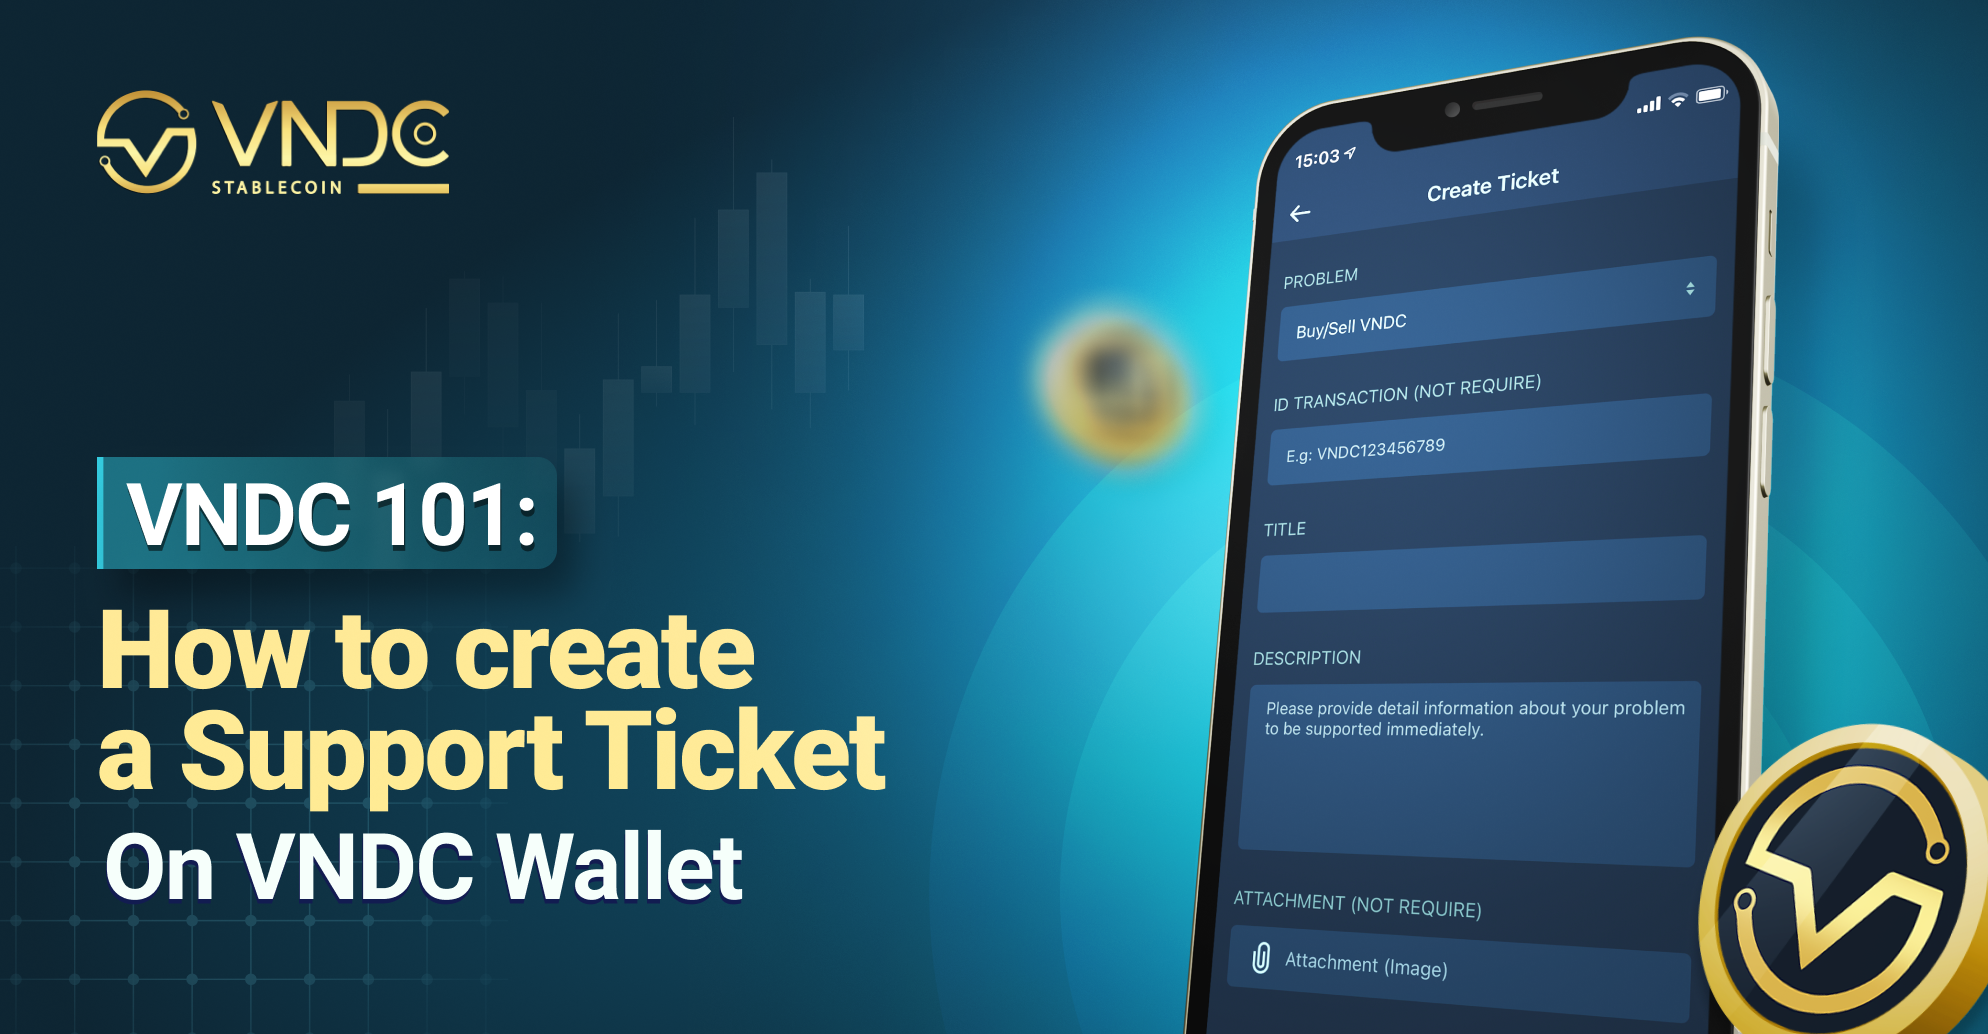 VNDC 101: How to create a Support Ticket on VNDC Wallet